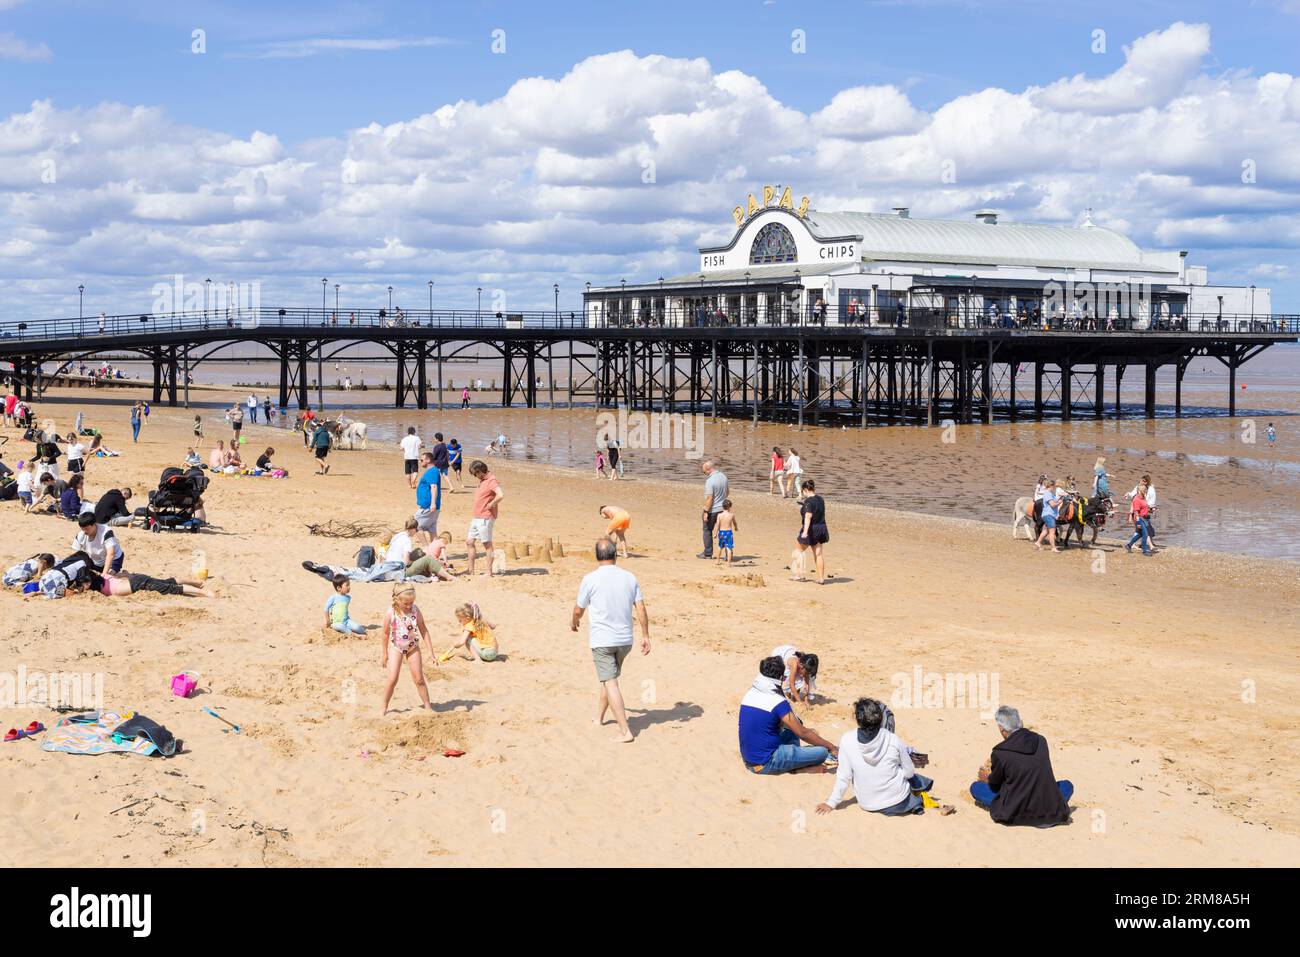 Cleethorpes beach with tourists and The Pier Cleethorpes with Papas fish and chips restaurant at Cleethorpes Lincolnshire England UK GB Europe Stock Photo